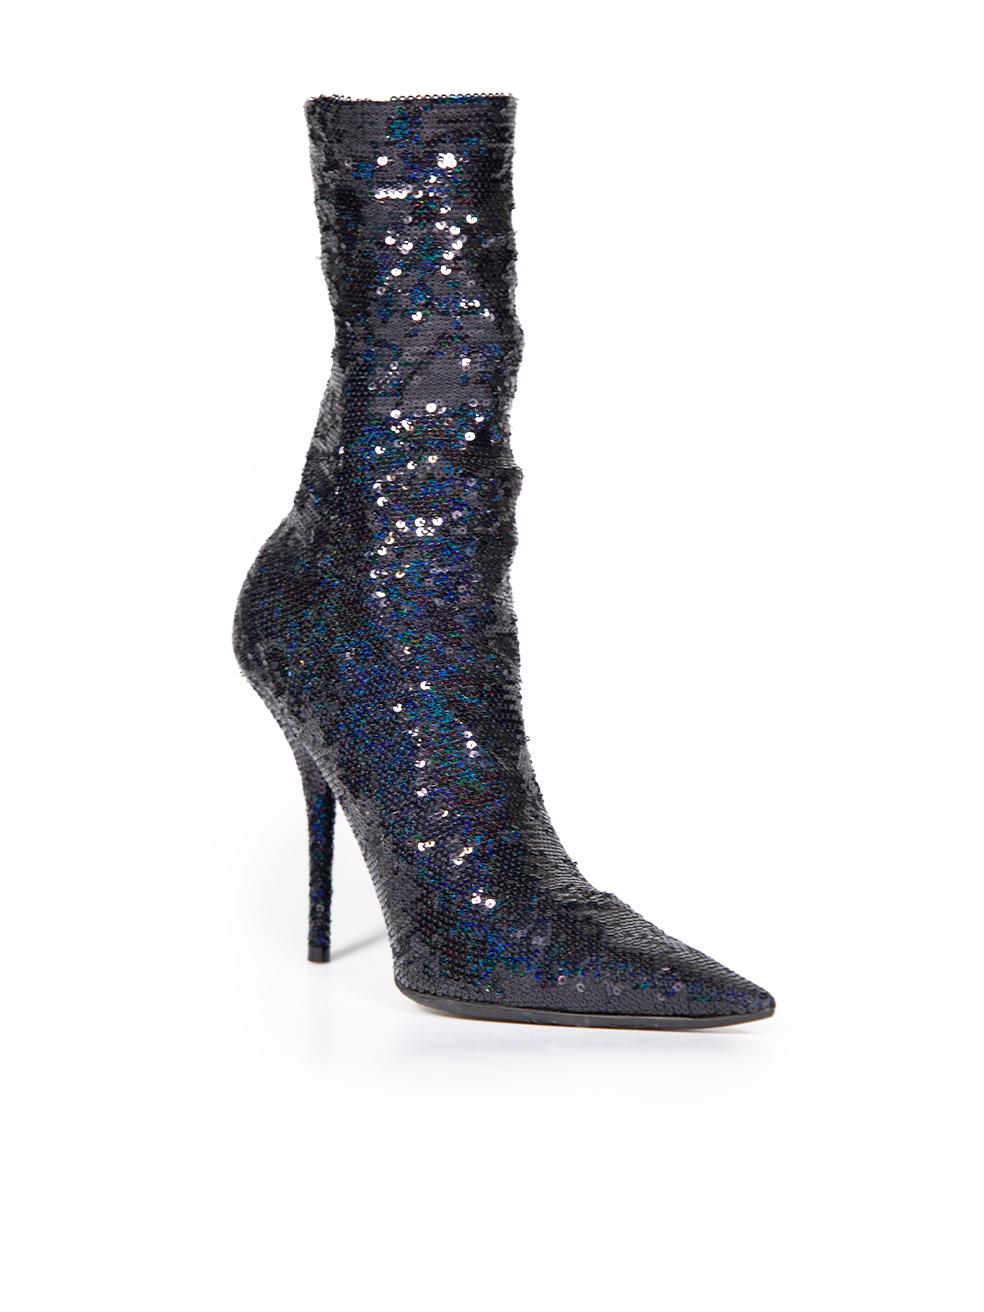 CONDITION is Very good. Hardly any visible wear to boots is evident on this Balenciaga designer resale item. These boots have been partially re-soled.
 
 
 
 Details
 
 
 Model: Knife
 
 Black
 
 Sequin
 
 Ankle boots
 
 Point toe
 
 Slip on
 
 High